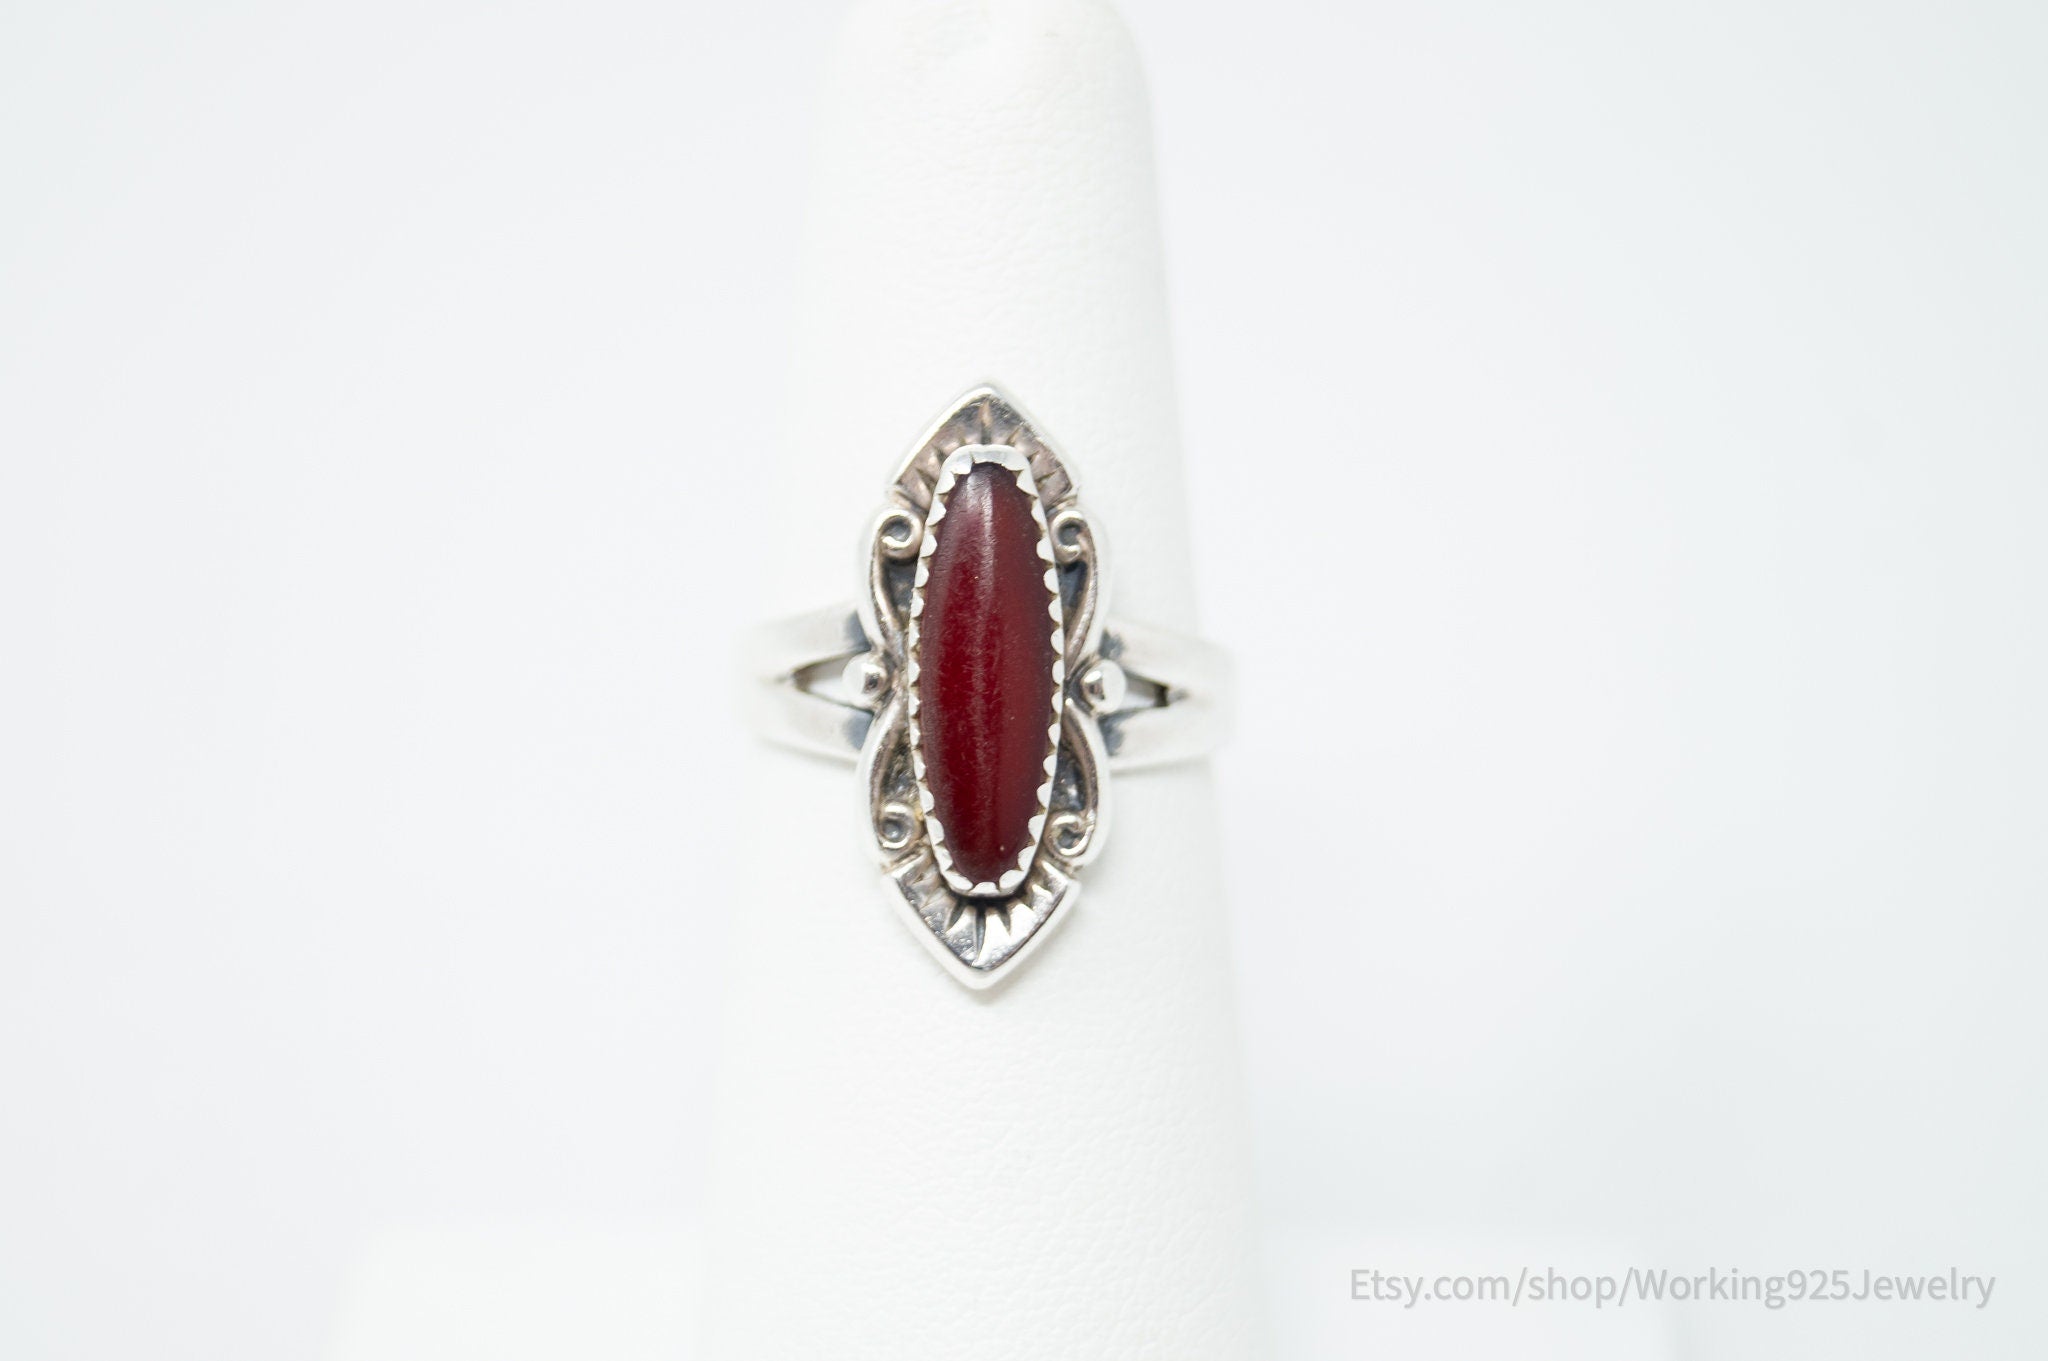 Vintage Designer Bell Trading Company Carnelian Sterling Silver Ring - Size 5